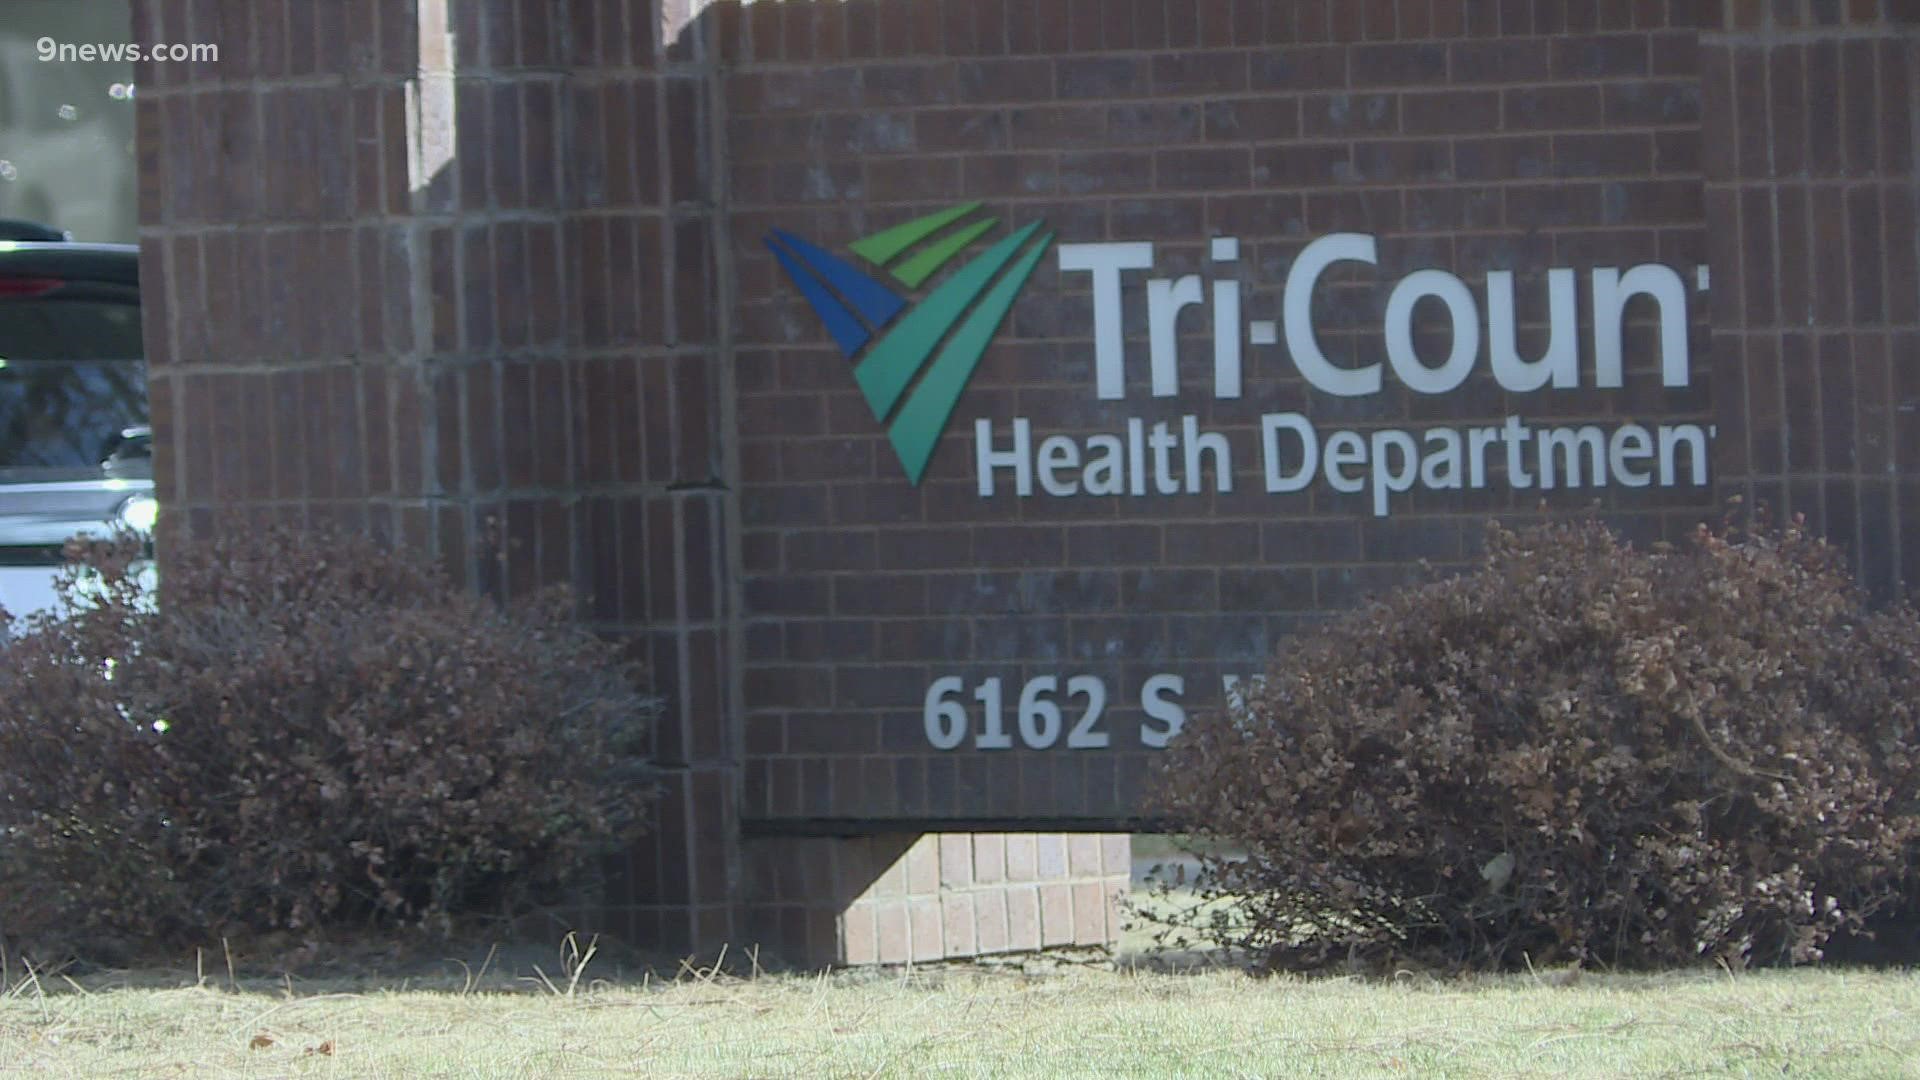 Arapahoe County is the third county to announce its intention to leave, and is working to establish a single-county health department.